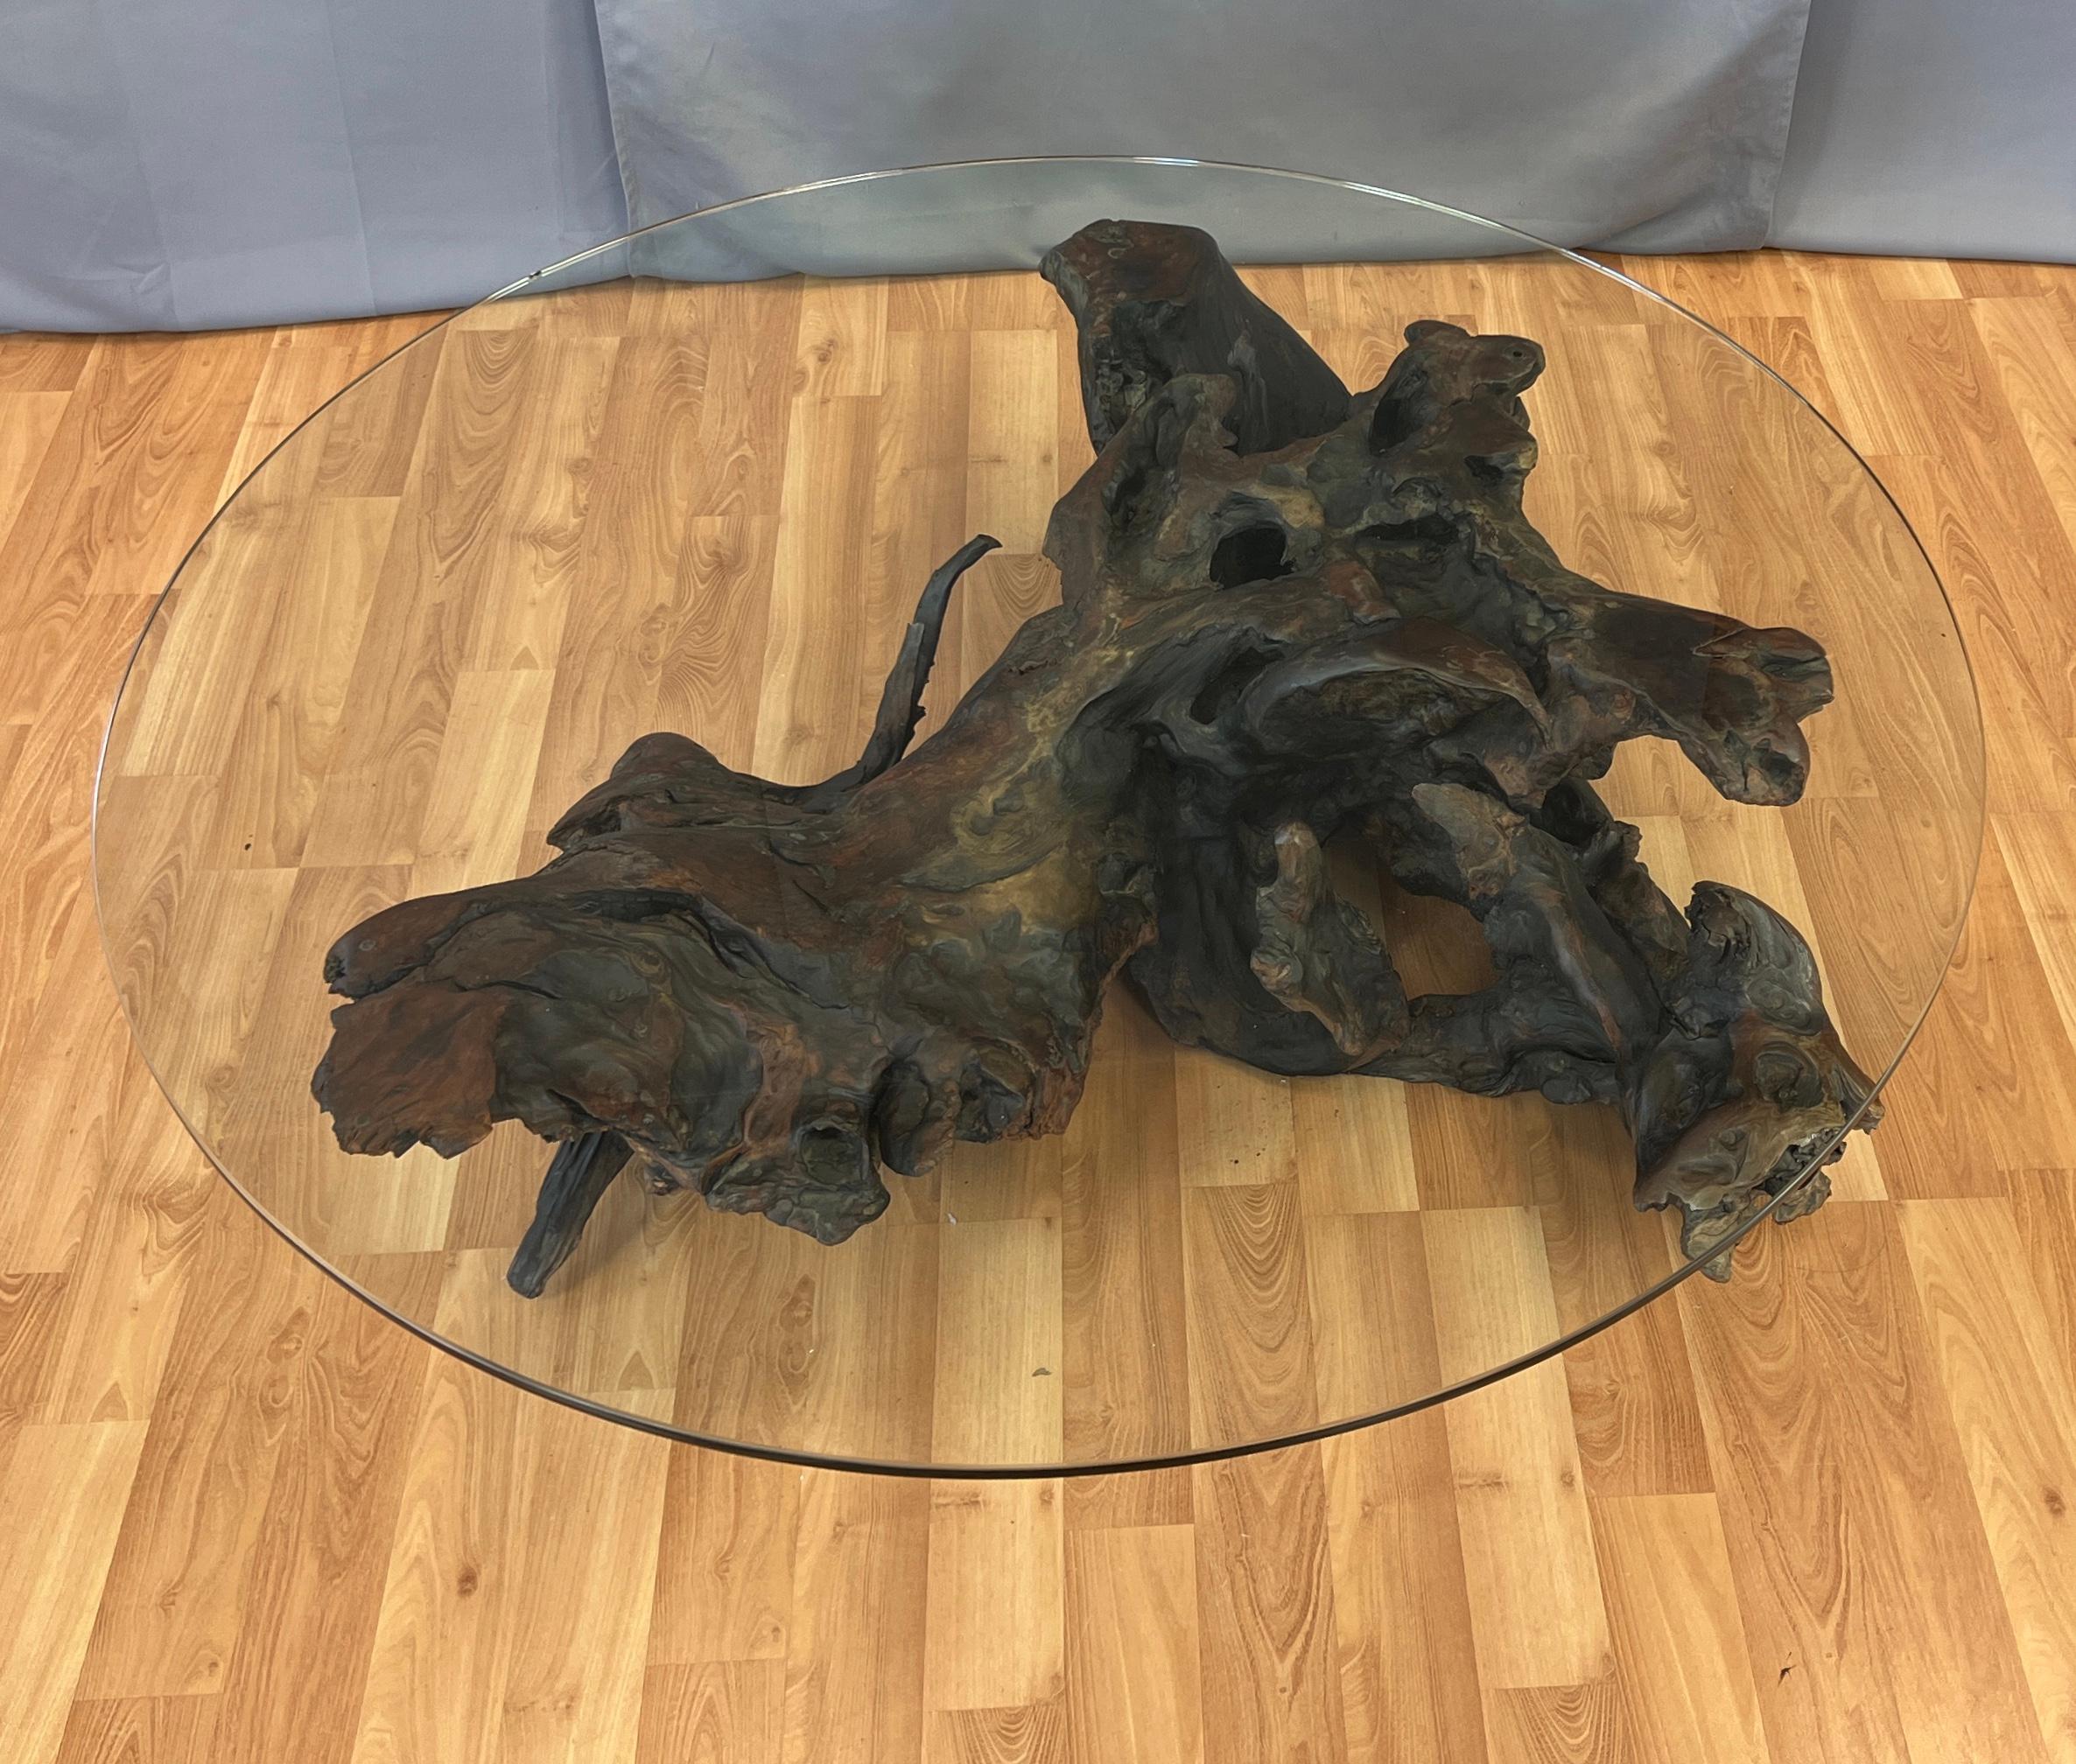 Monumental 1970s Natural Freeform Wood Round Glass Top Coffee Table In Good Condition For Sale In San Francisco, CA